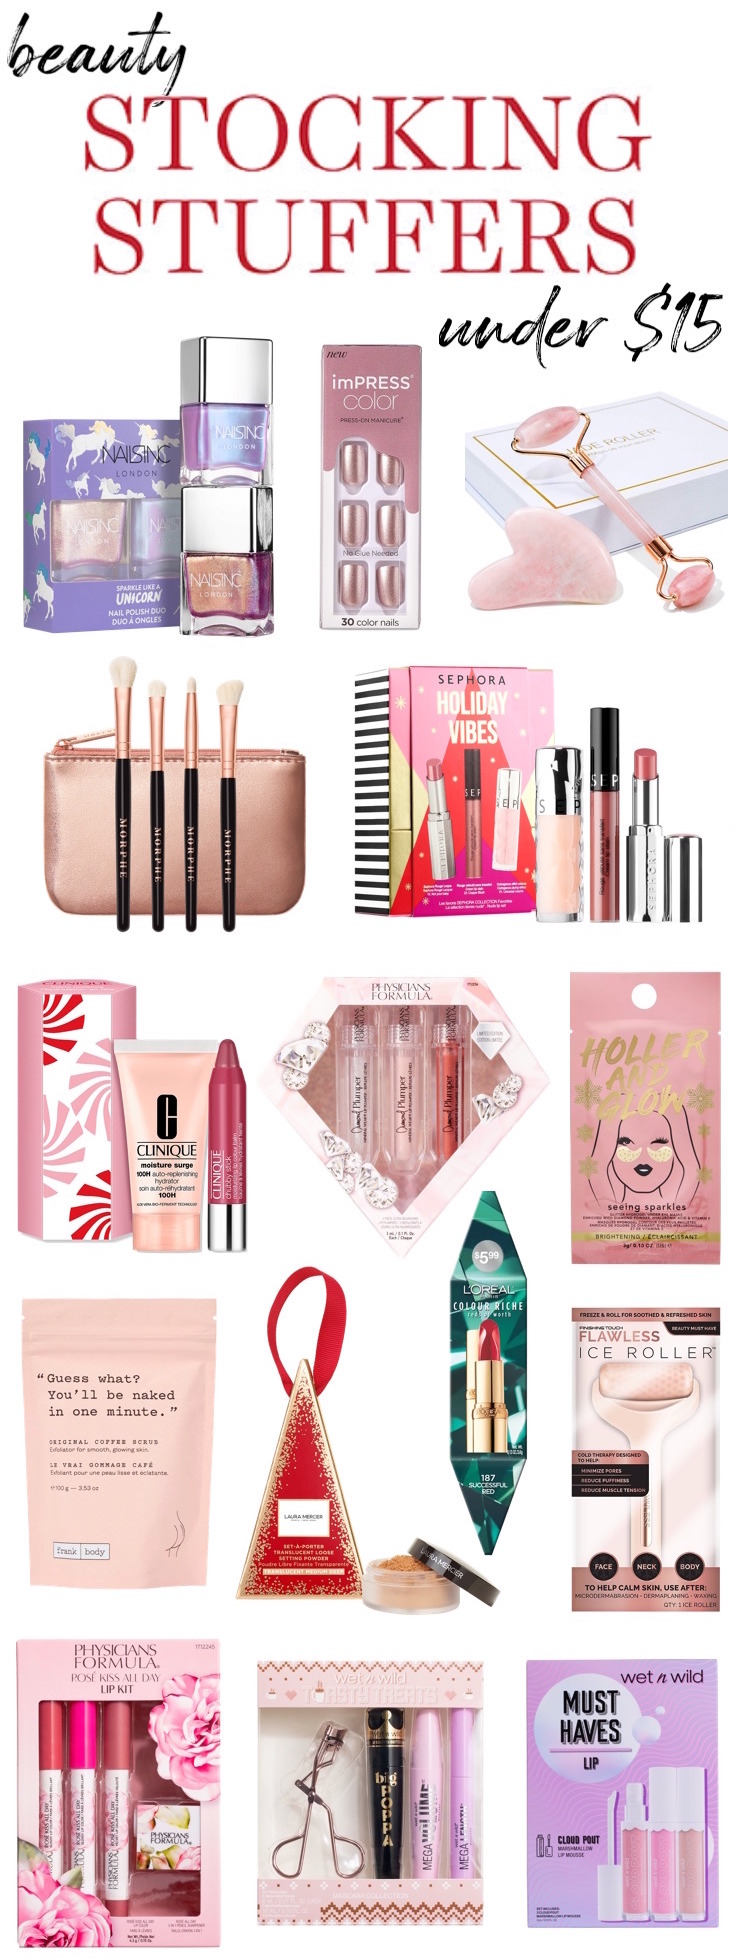 Small gifts, big smiles! These self-care and beauty stocking stuffers under $15 are the perfect size & price and pack a big punch!